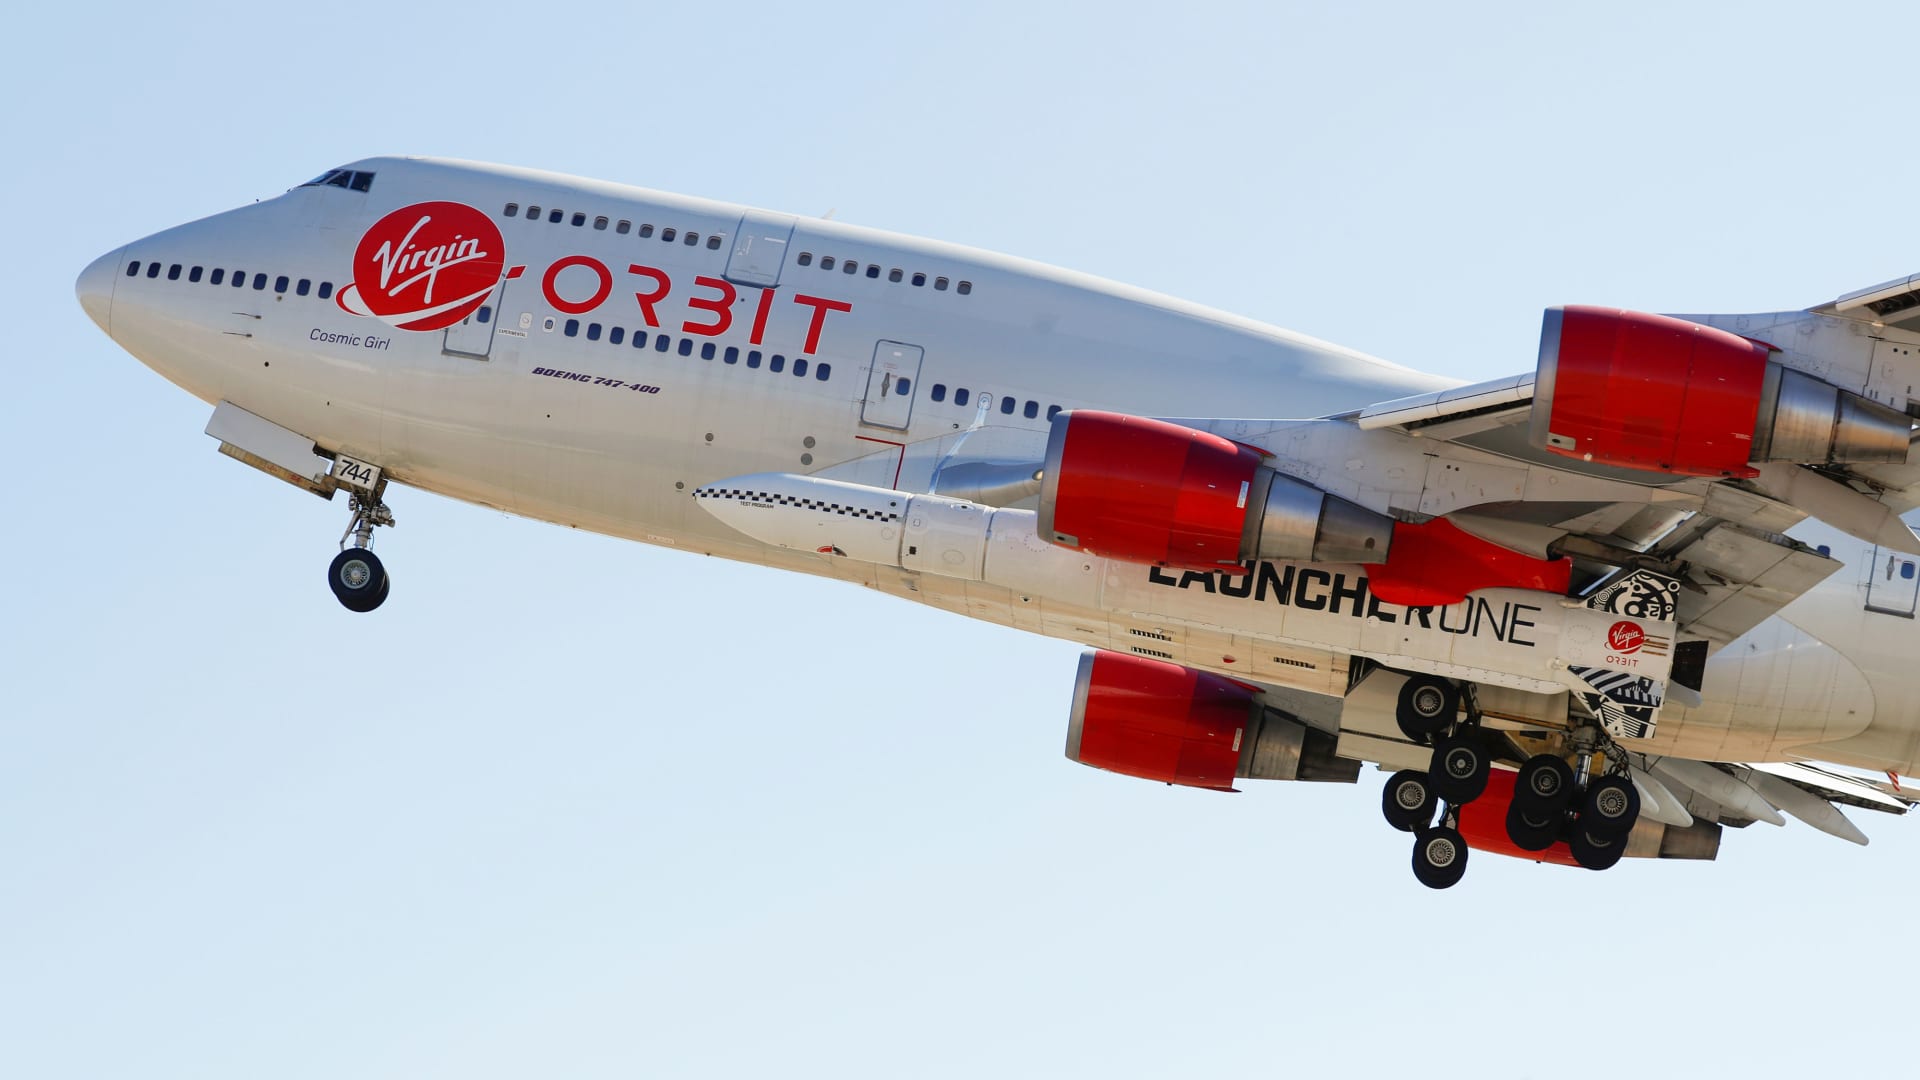 Virgin Orbit receives $17 million bid for rocket-carrying aircraft in bankruptcy court